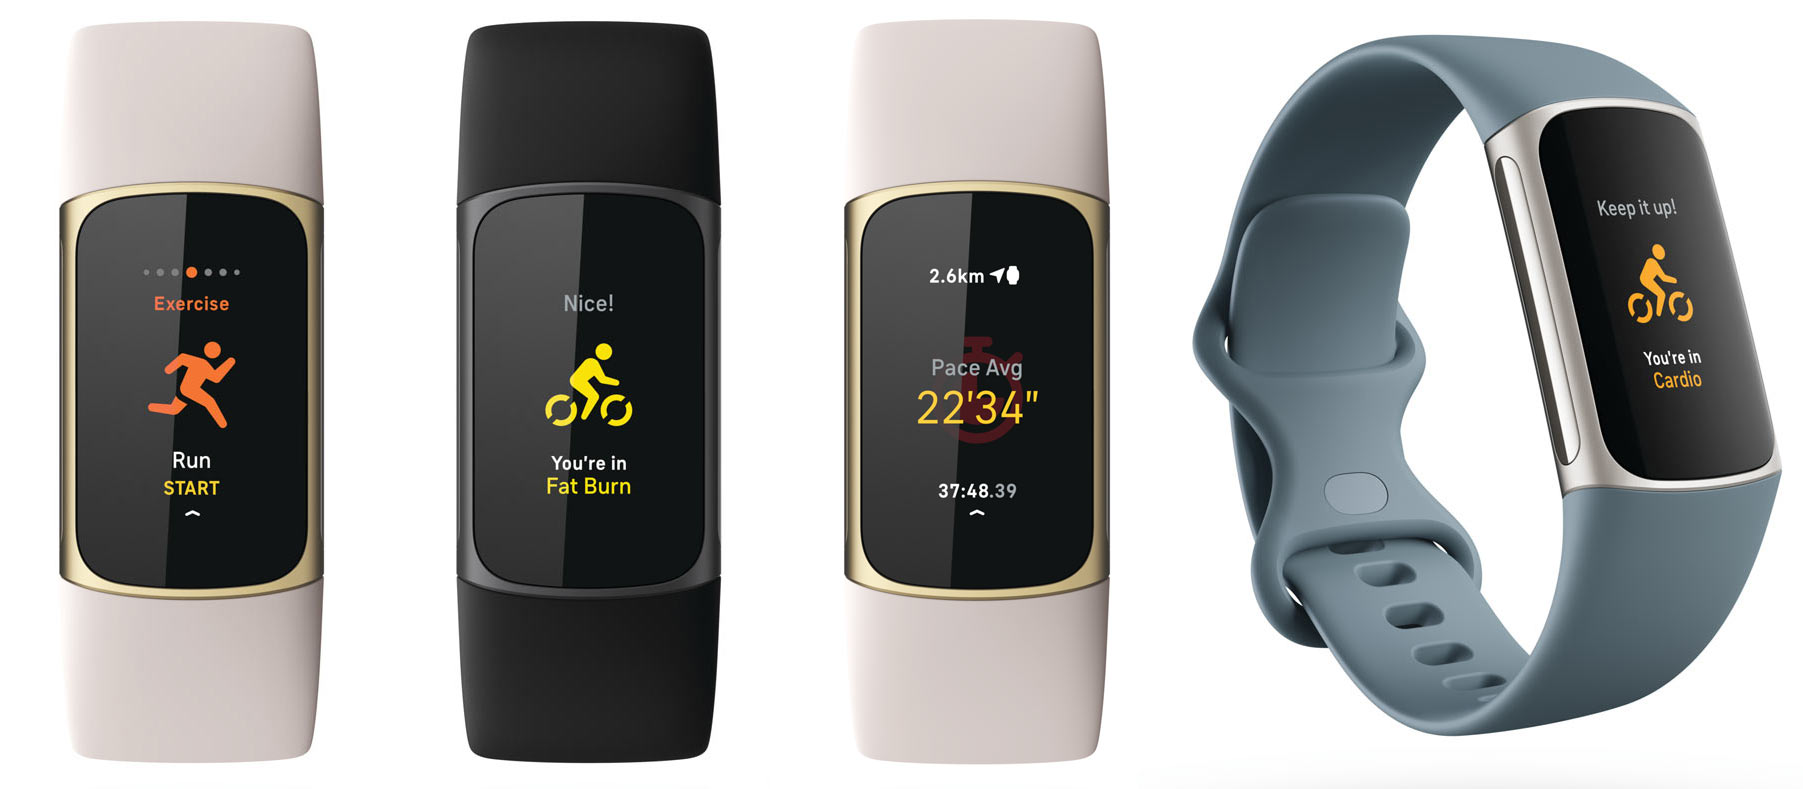 Fitbit Charge helps you train smarter by tracking literally everything